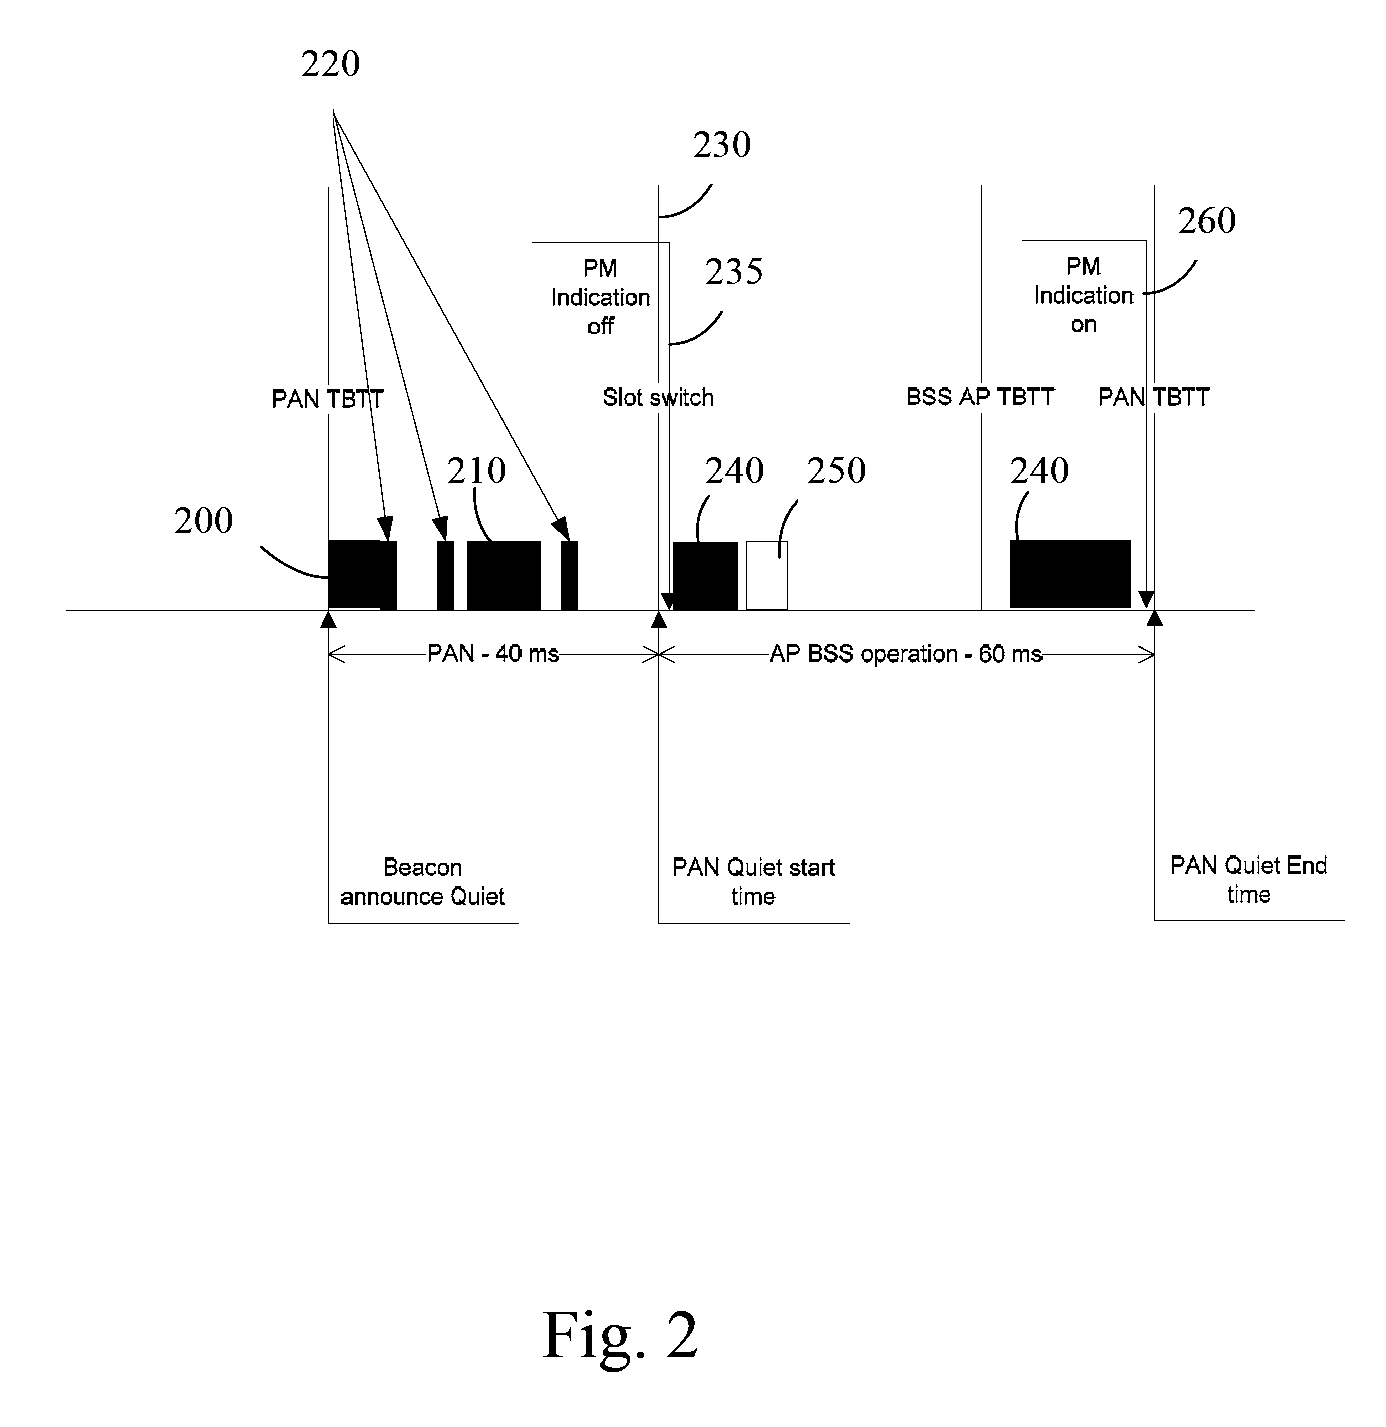 Method and apparatus for improved dual channel operation and access point discovery in wireless communication networks